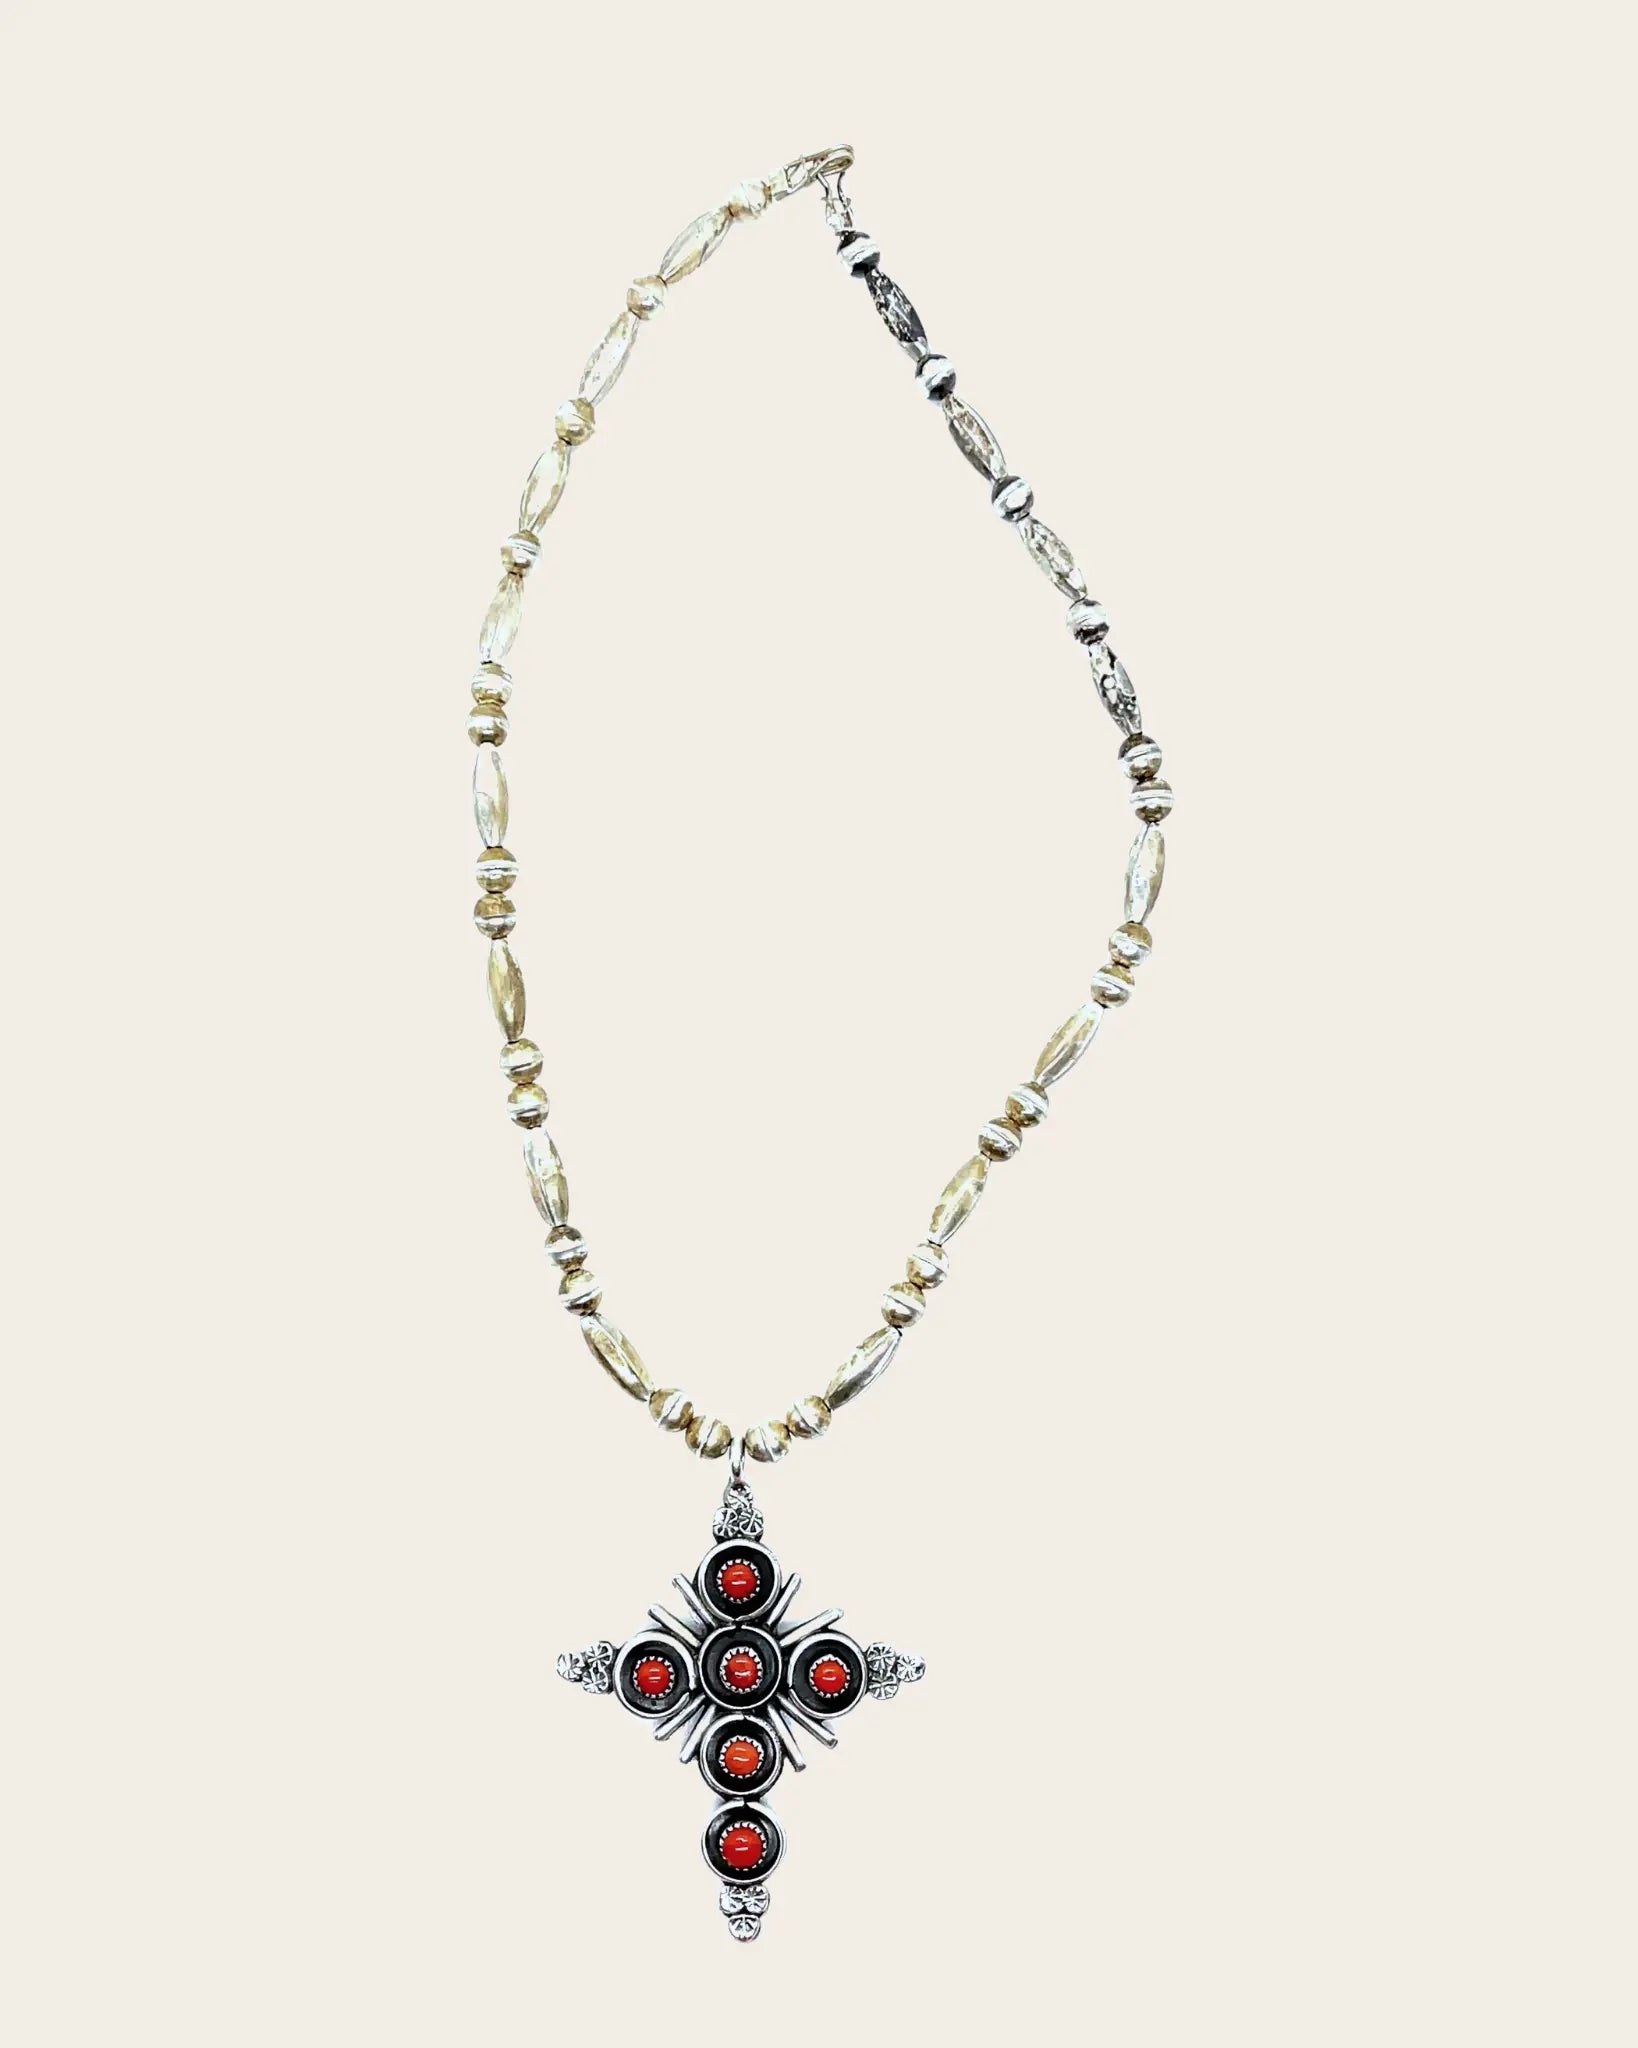 1980s turquoise and coral reversible cross necklace 1980s turquoise and coral reversible cross necklace Vintage at the Squash Blossom Vintage at the Squash Blossom  Squash Blossom Vail